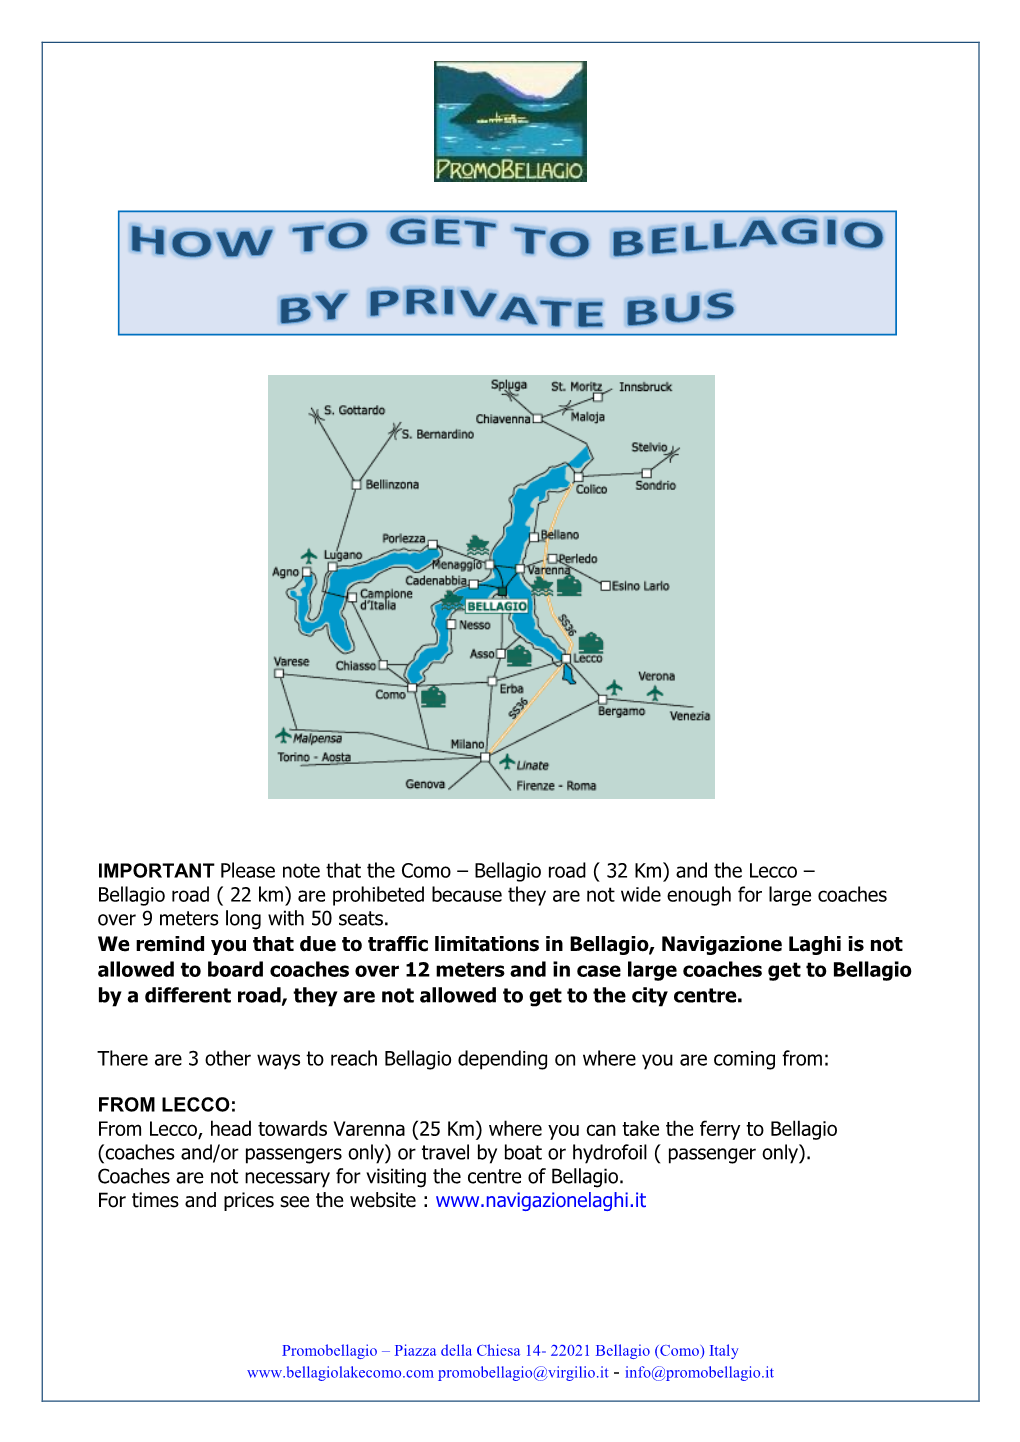 IMPORTANT Please Note That the Como – Bellagio Road ( 32